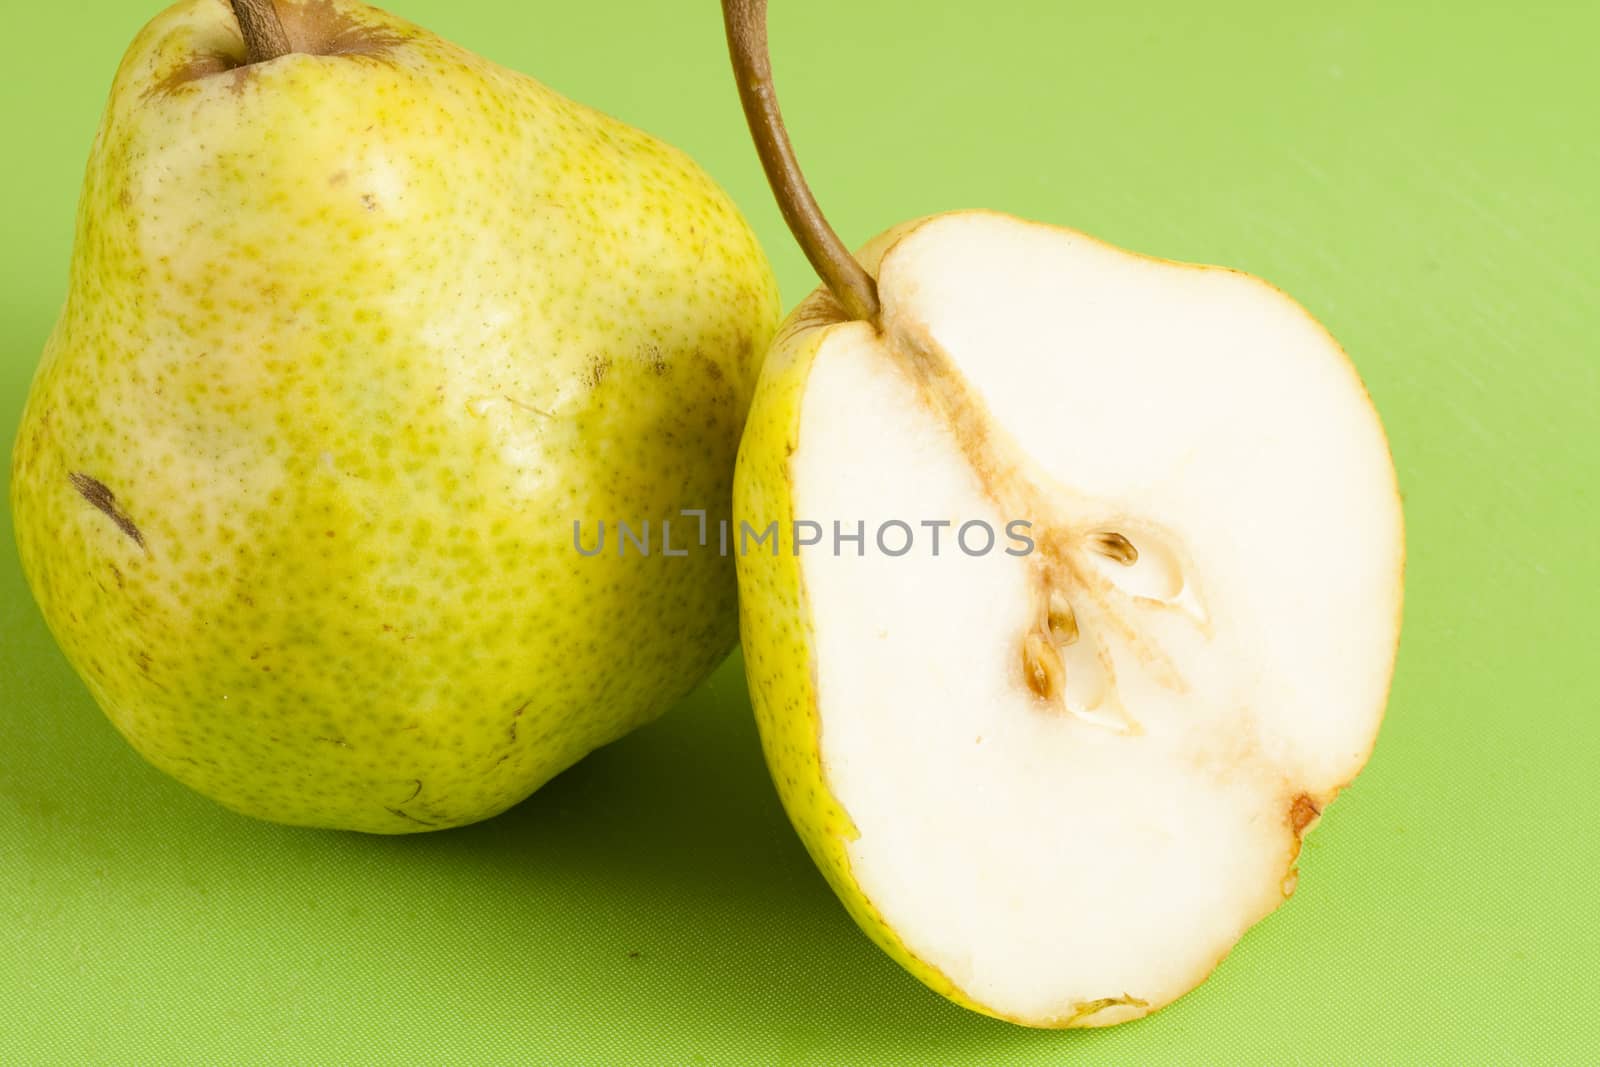 green pear cut in half on a green floor and a whole pear